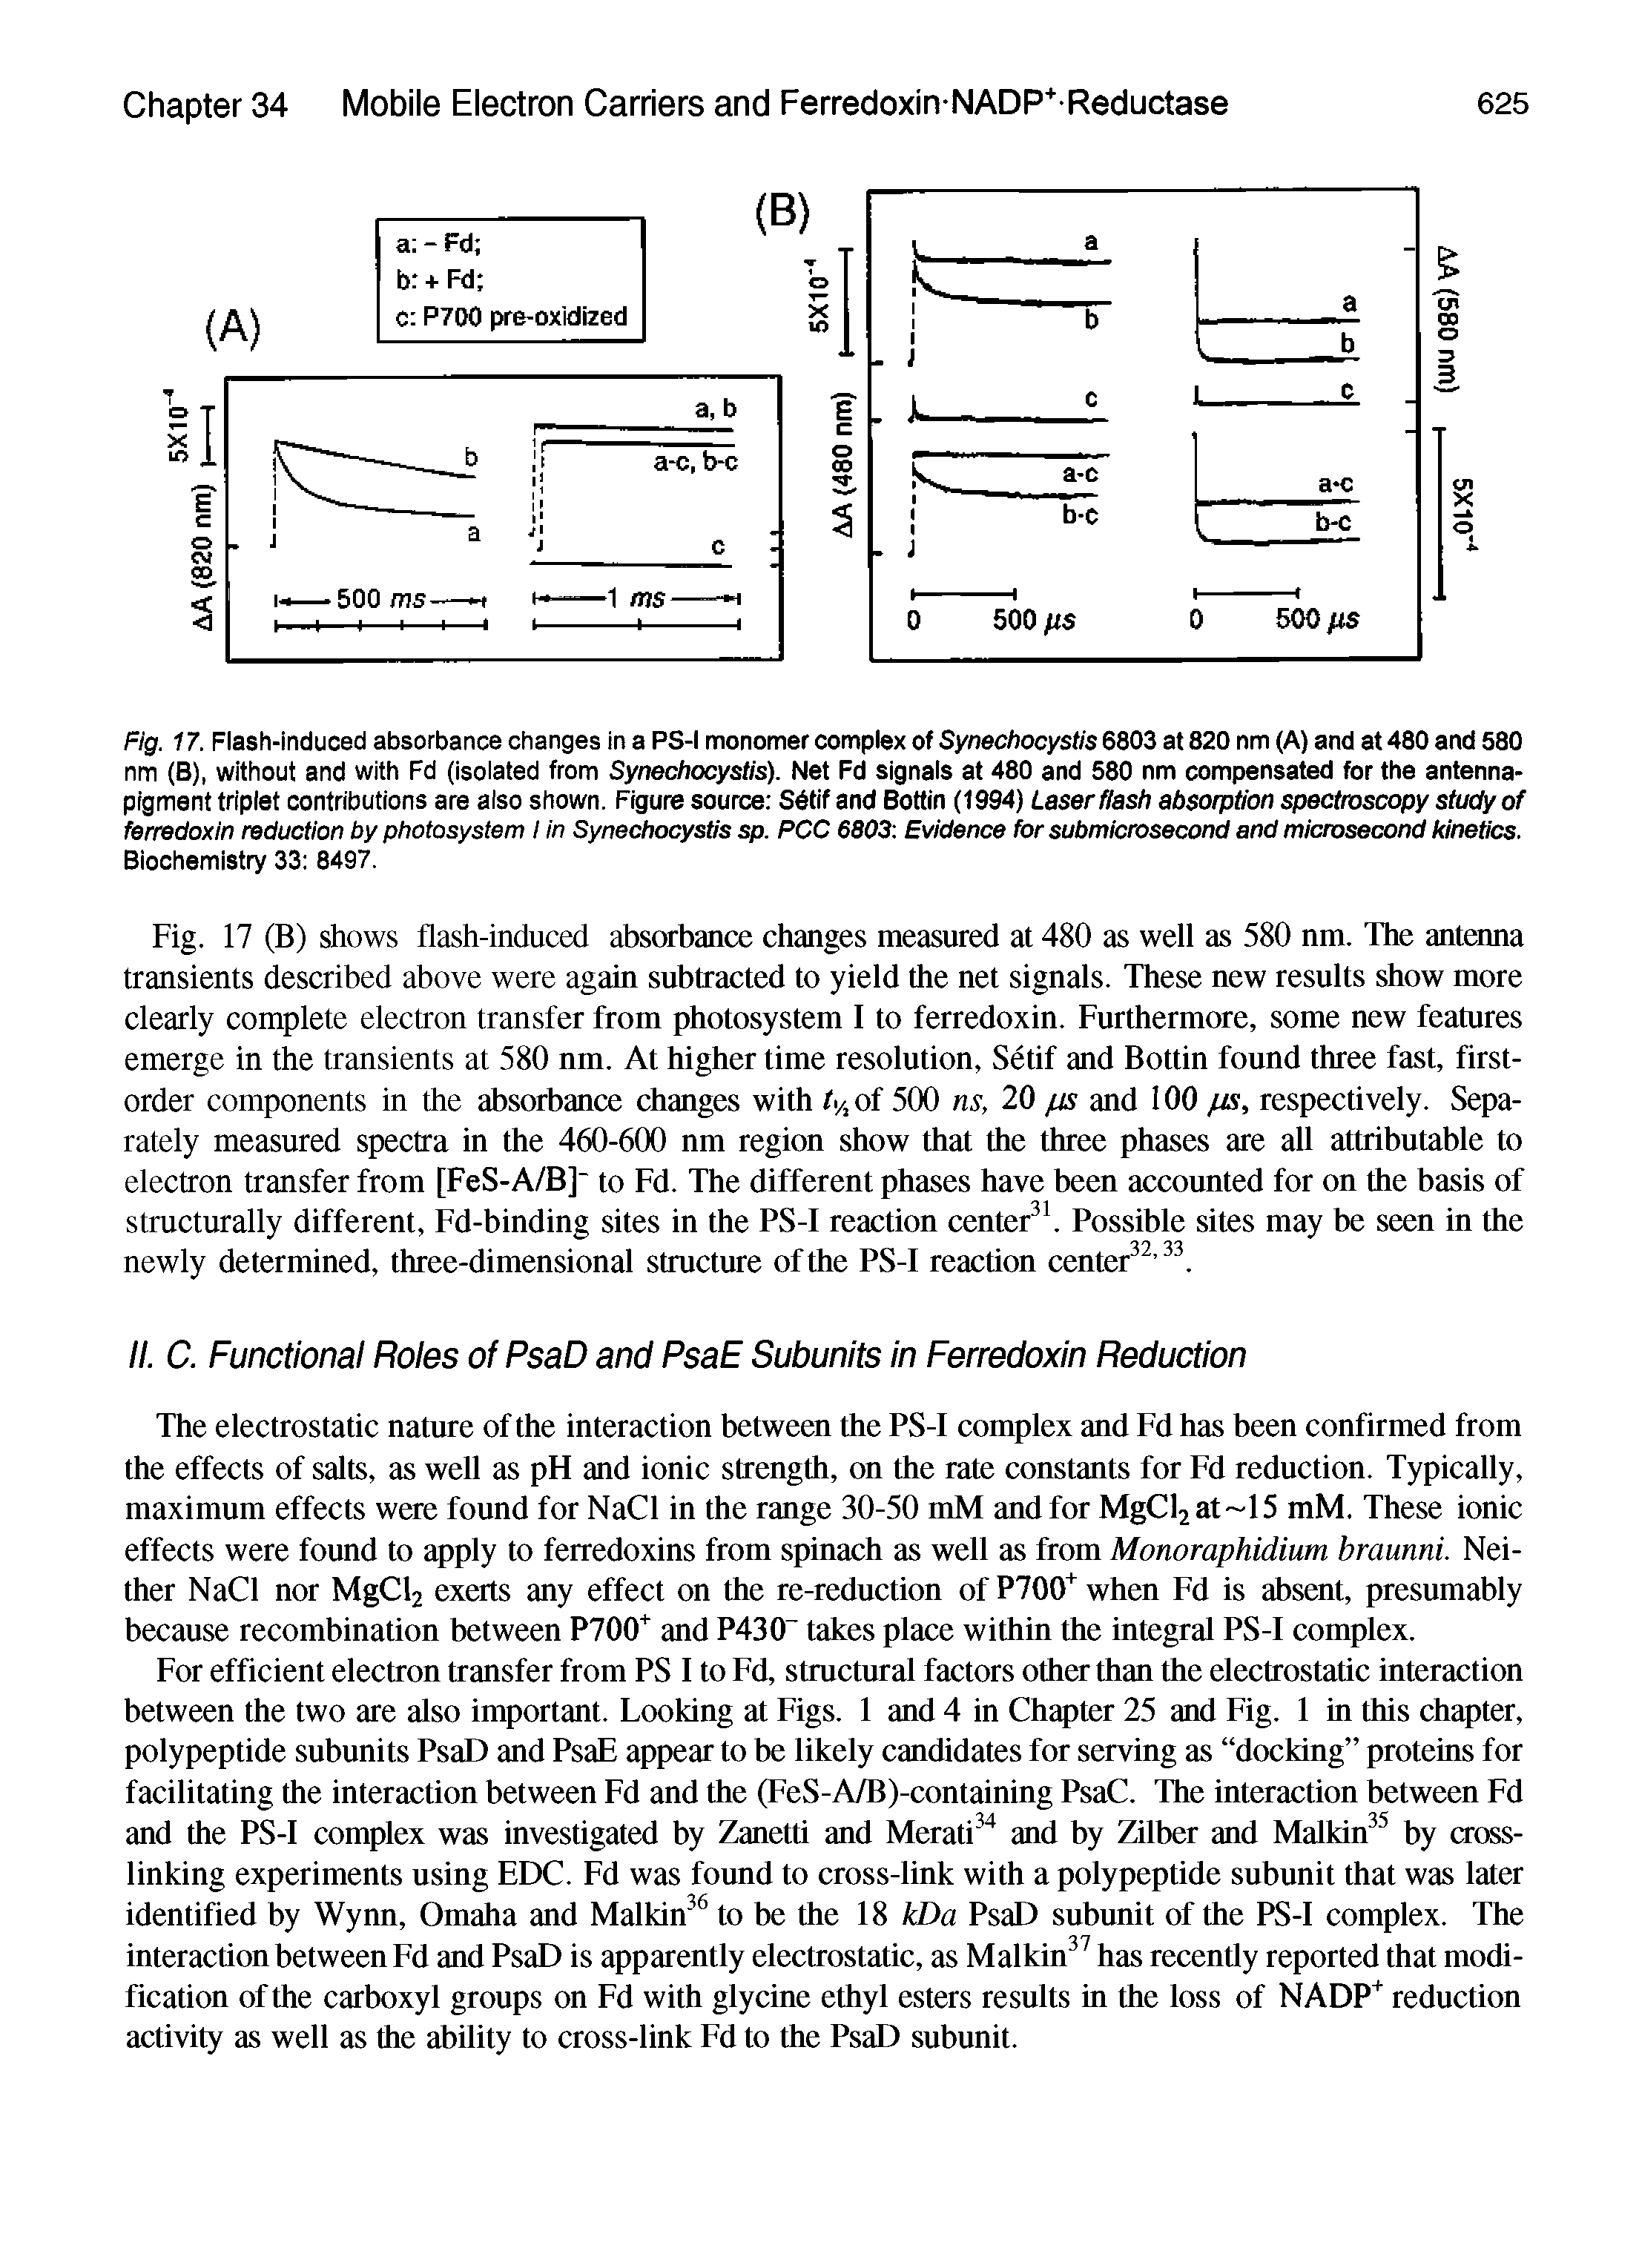 Fig. 17 (B) shows flash-induced absorbance changes measured at 480 as well as 580 nm. The anteima transients described above were again subtracted to yield the net signals. These new results show more clearly complete electron transfer from photosystem I to ferredoxin. Furthermore, some new features emerge in the transients at 580 nm. At higher time resolution, Setif and Bottin found three fast, first-order components in the absorbance changes with ty, of 500 ns, 20 jus and 100 jus, respectively. Separately measured spectra in the 460-600 nm region show that the three phases are all attributable to electron transfer from [FeS-A/B] to Fd. The different phases have been accounted for on the basis of structurally different, Fd-binding sites in the PS-I reaction center Possible sites may be seen in the newly determined, three-dimensional structure of the PS-I reaction center . ...